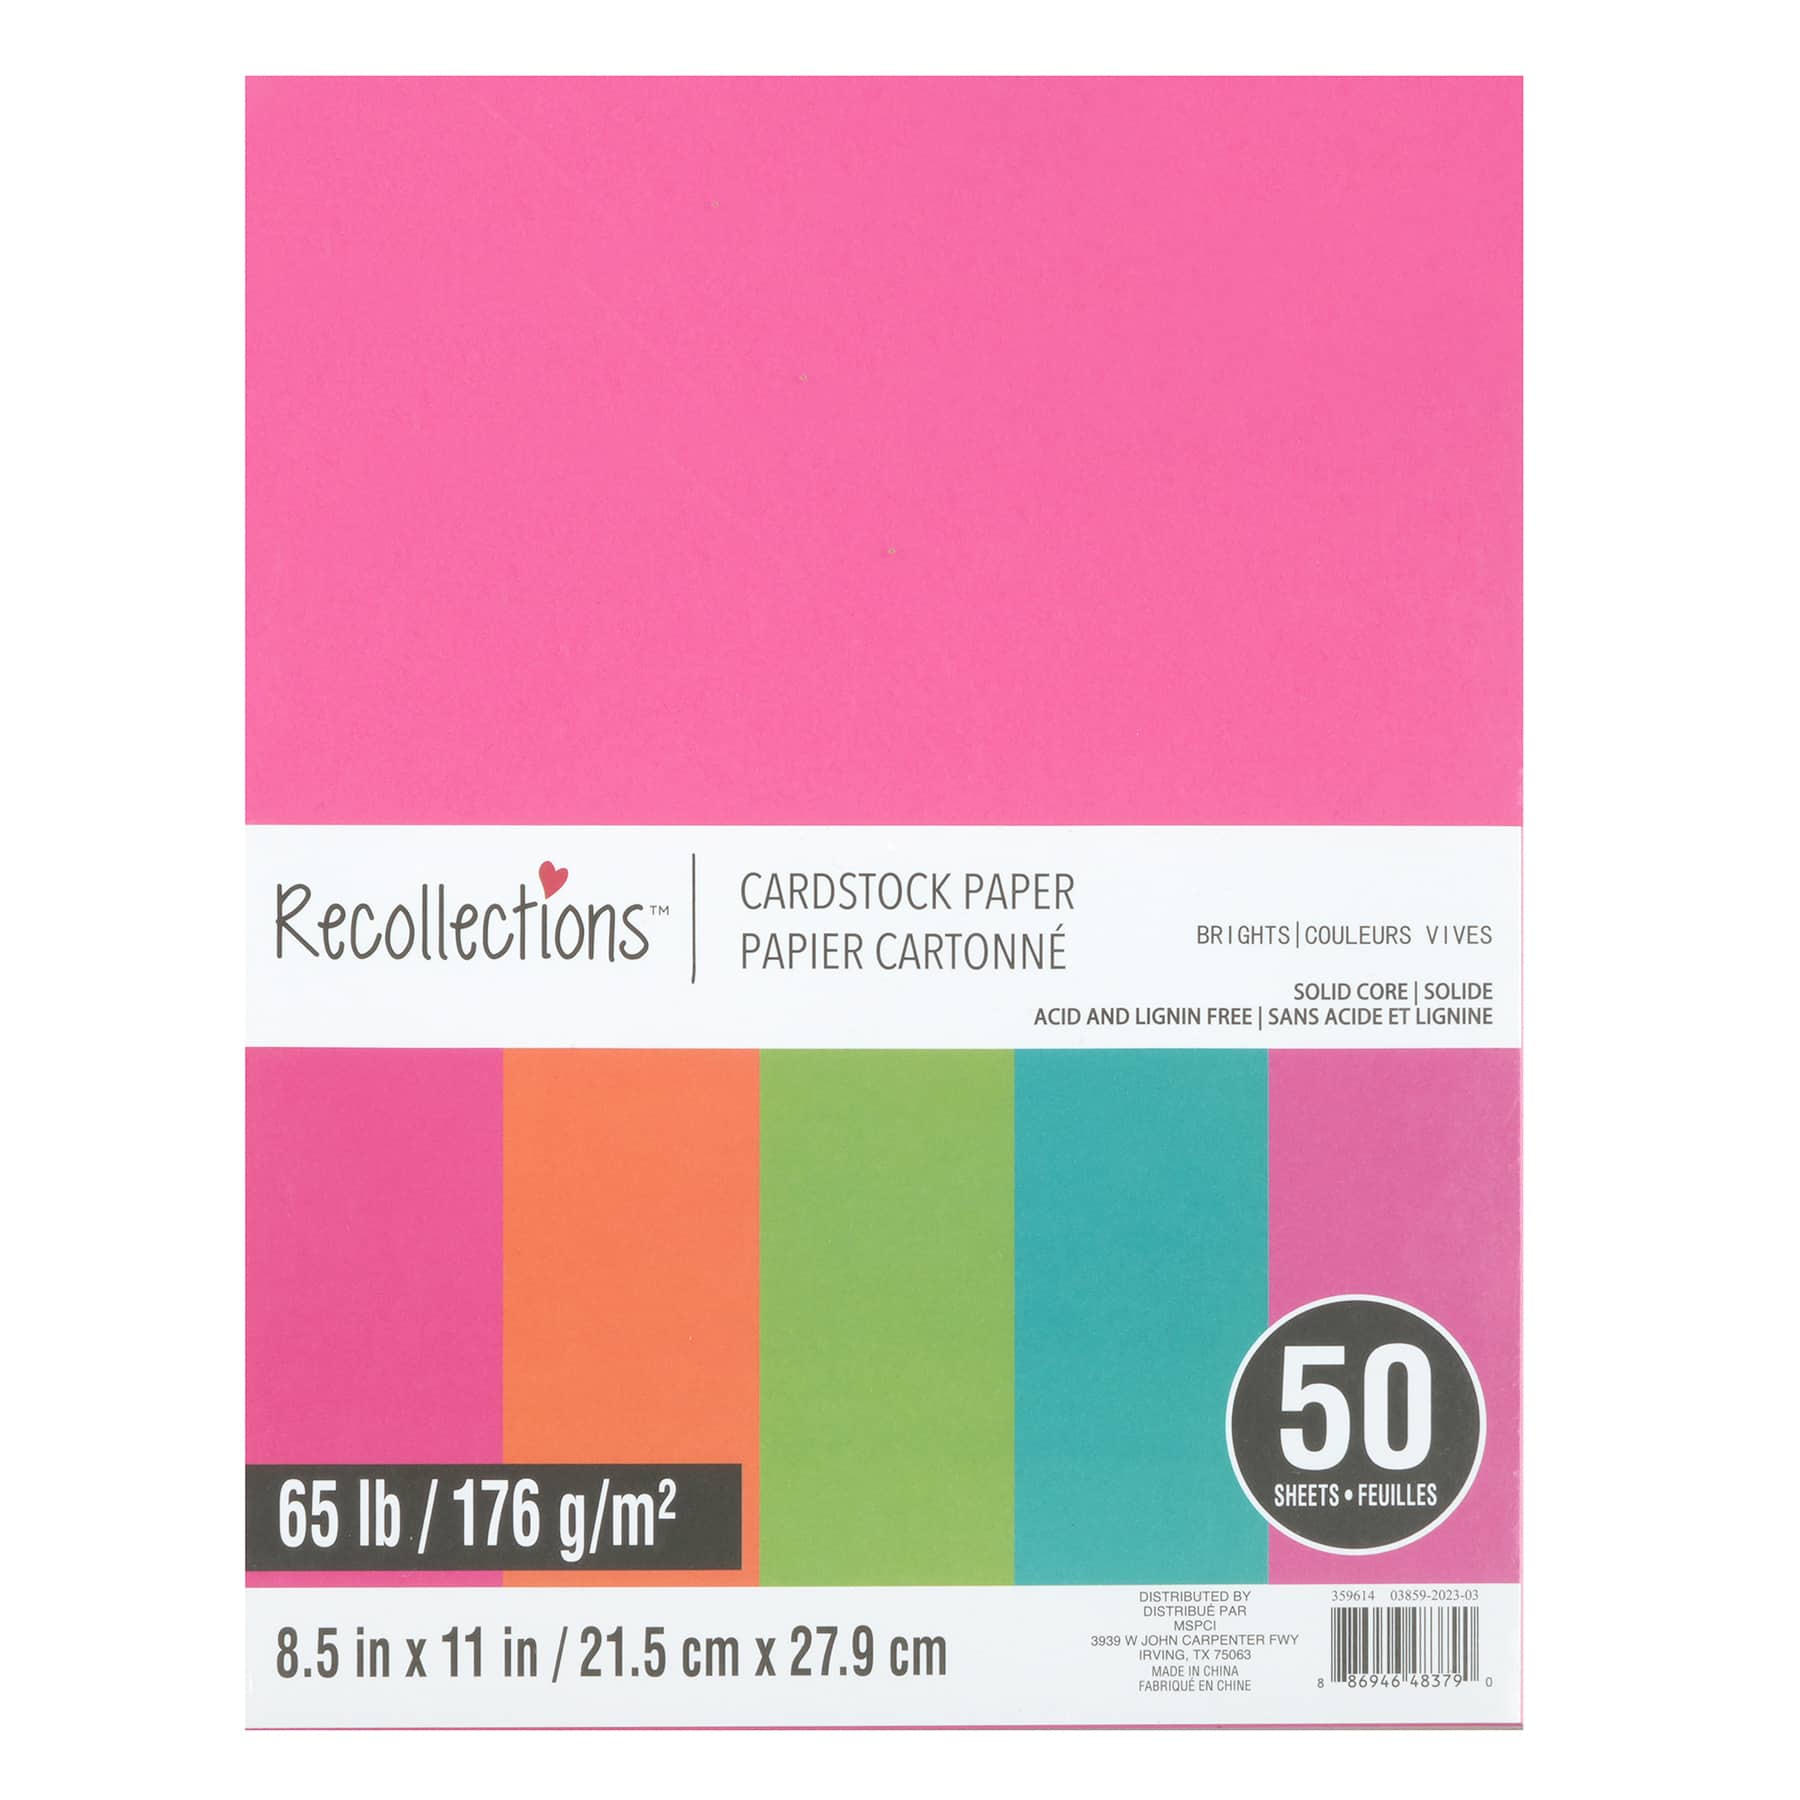 White 12”; x 12”; Cardstock Paper by Recollections™, 100 Sheets